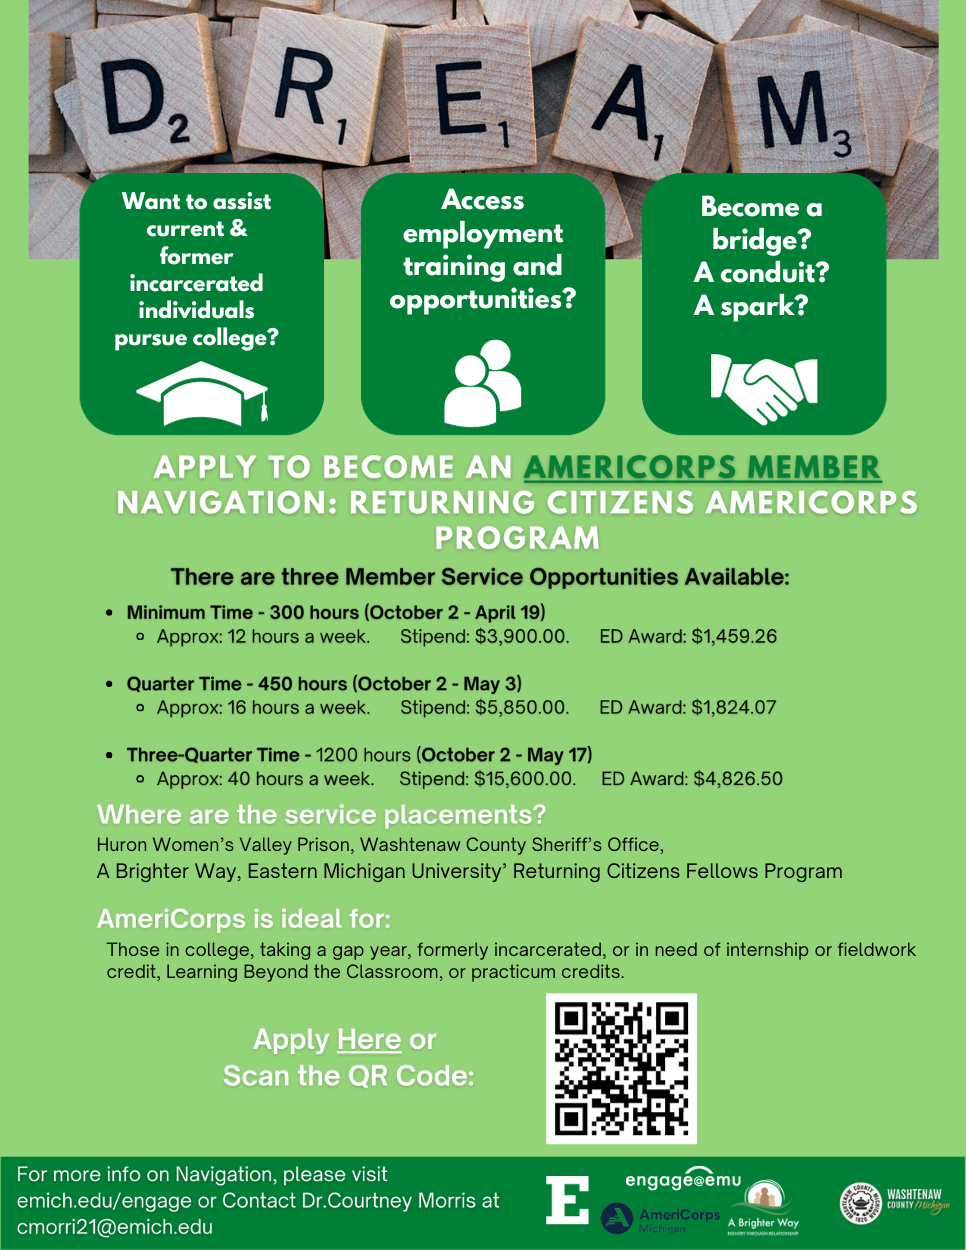 AmeriCorps Recruiting Flyer for Fall Cohort, Apply using the link above